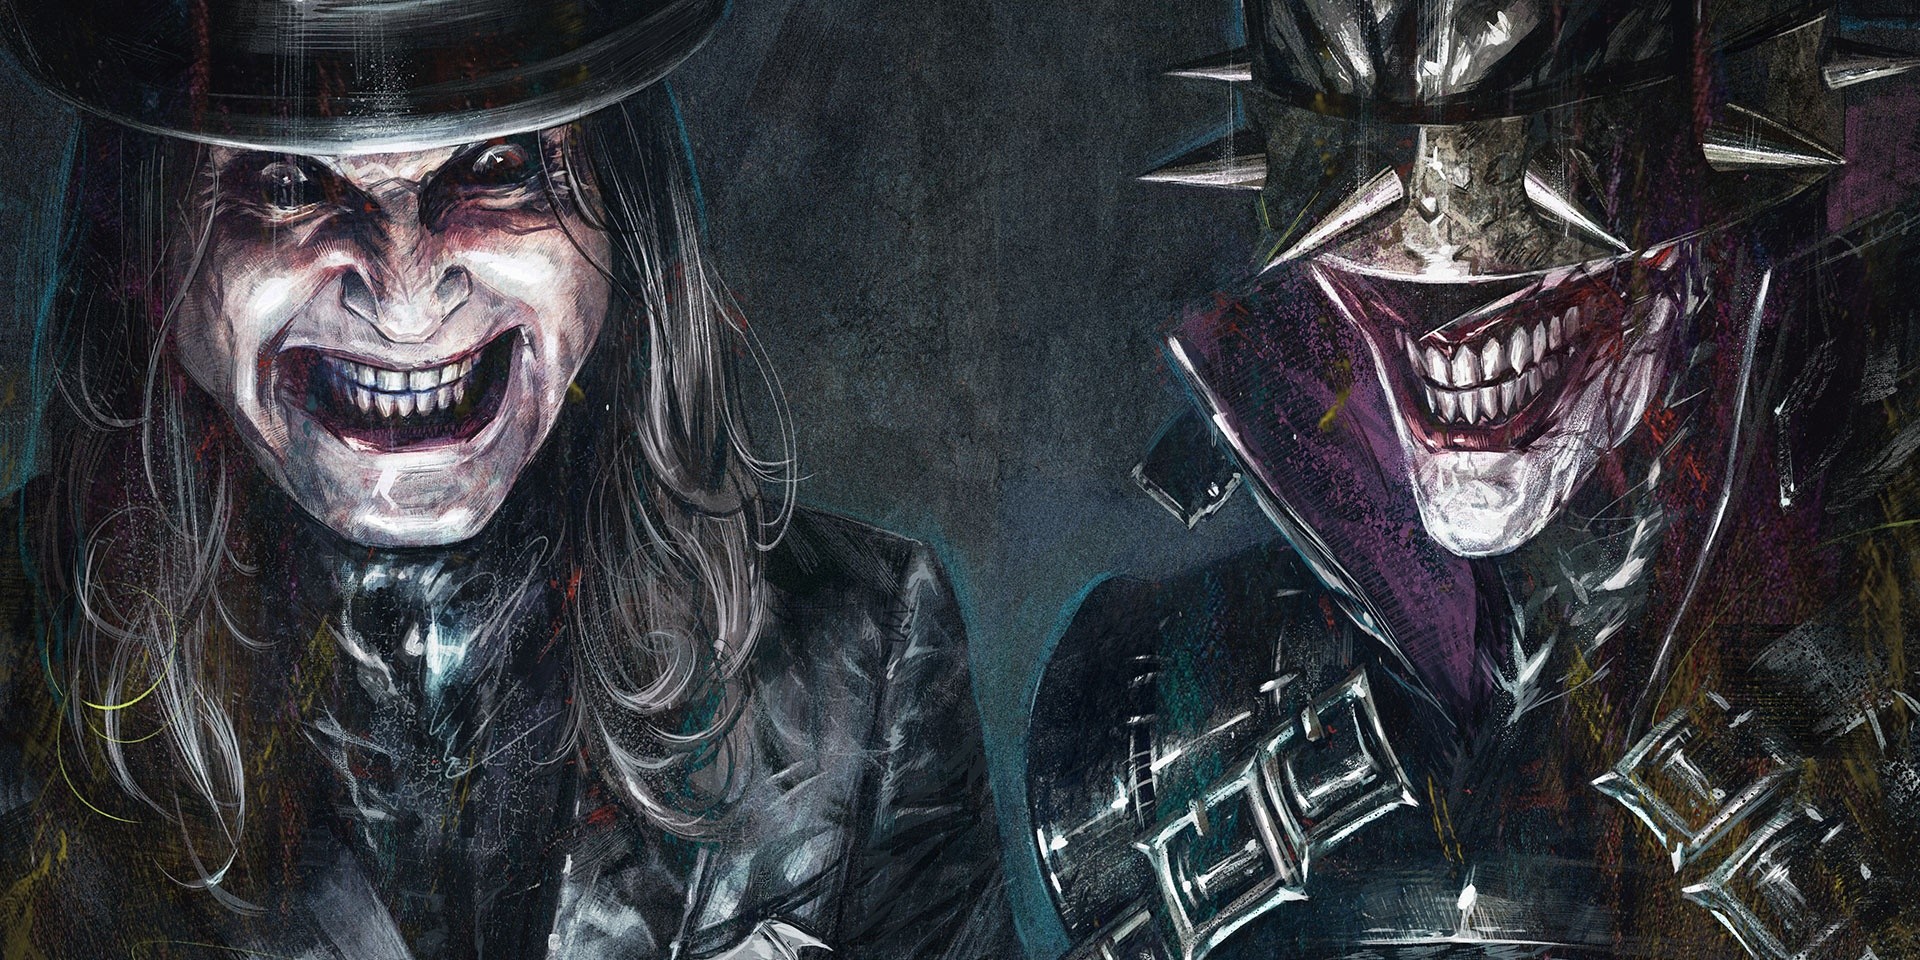 DC ties up with Ozzy Osbourne, Megadeth, Dream Theater, and more for Dark Nights: Death Metal – Band Edition comic book series